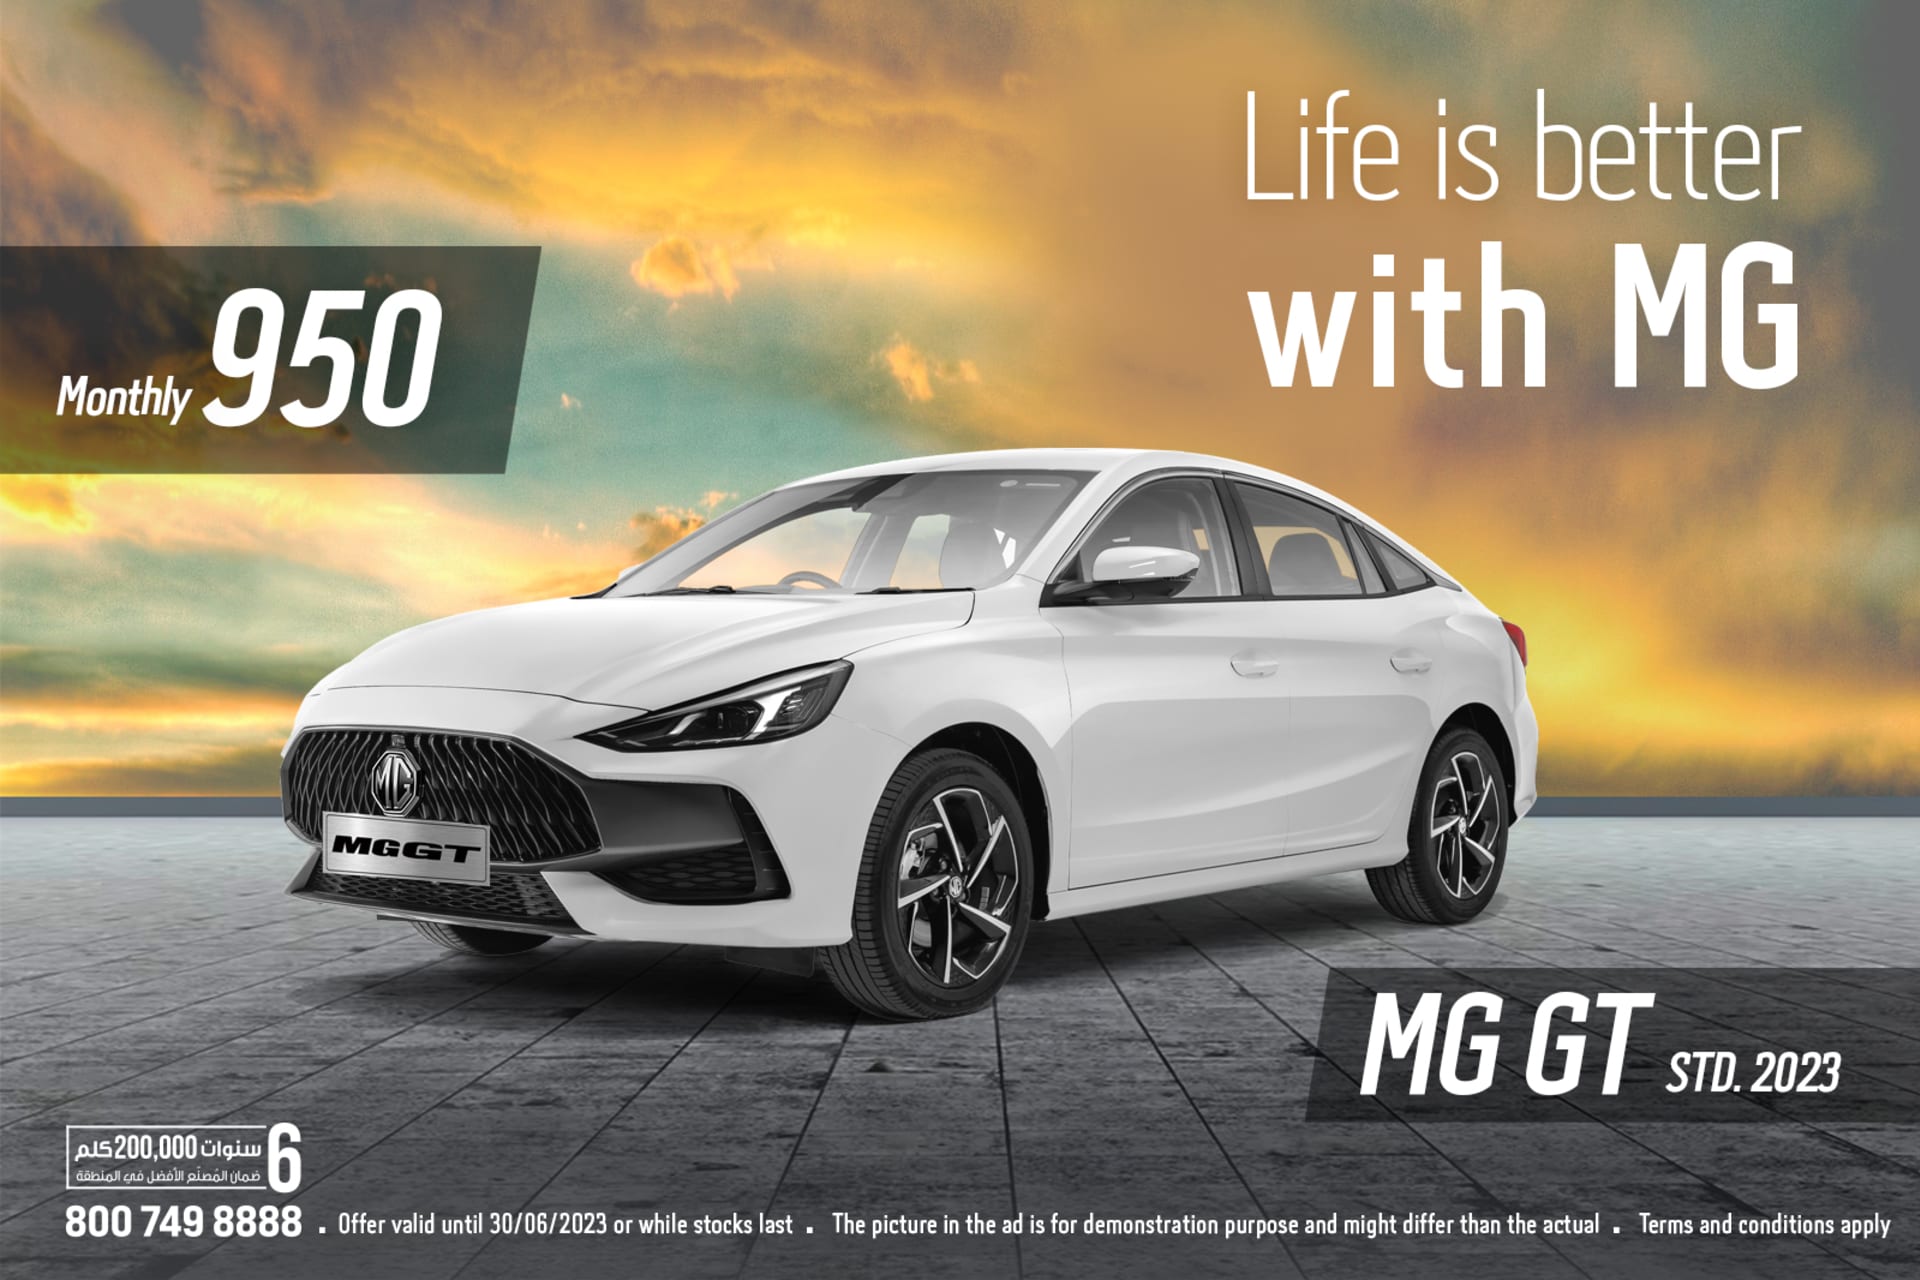 life is better with Mg